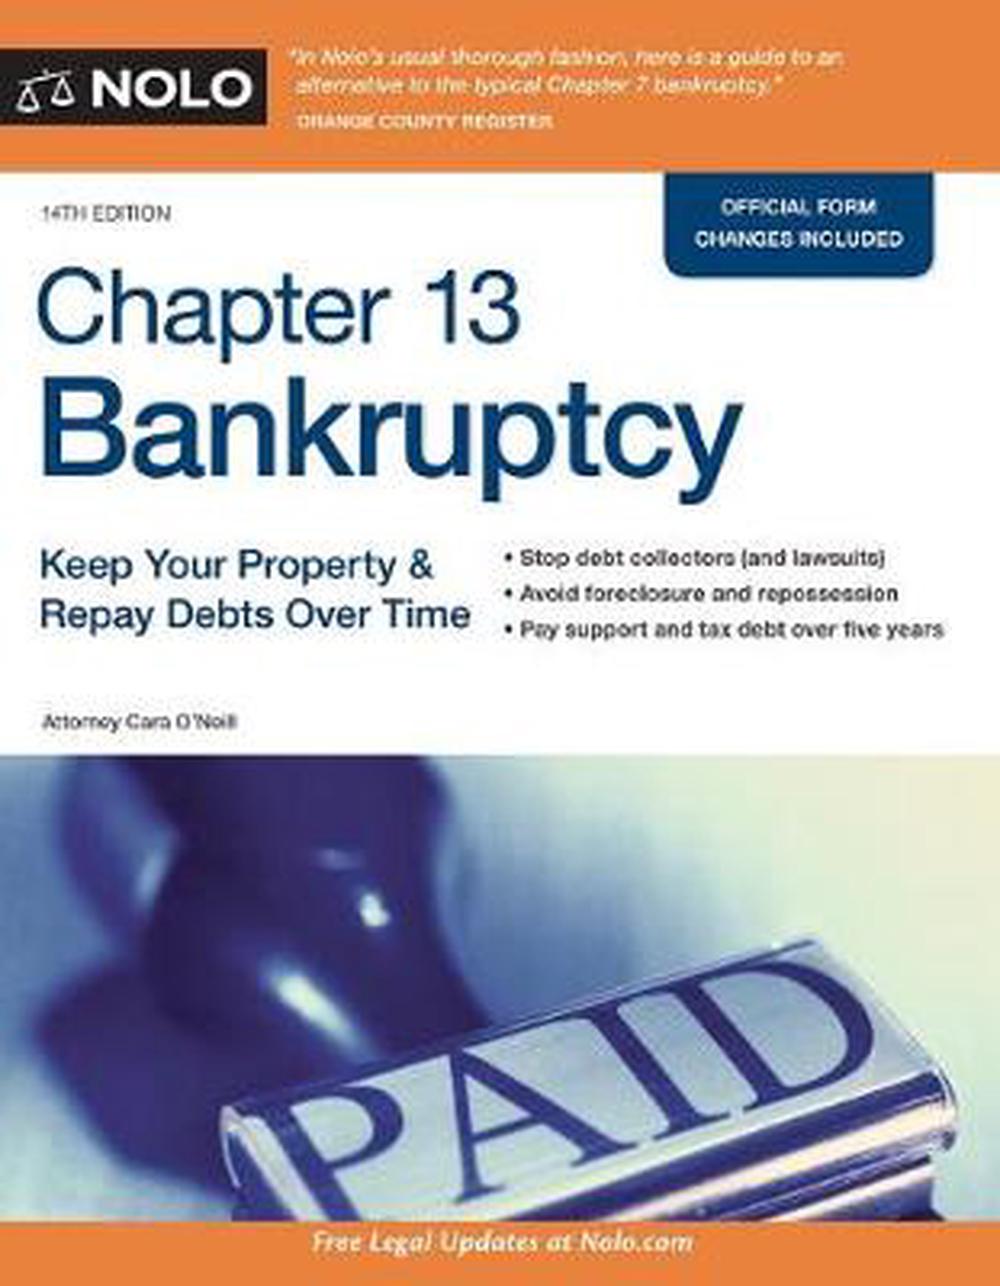 Chapter 13 Bankruptcy Keep Your Property & Repay Debts Over Time Keep